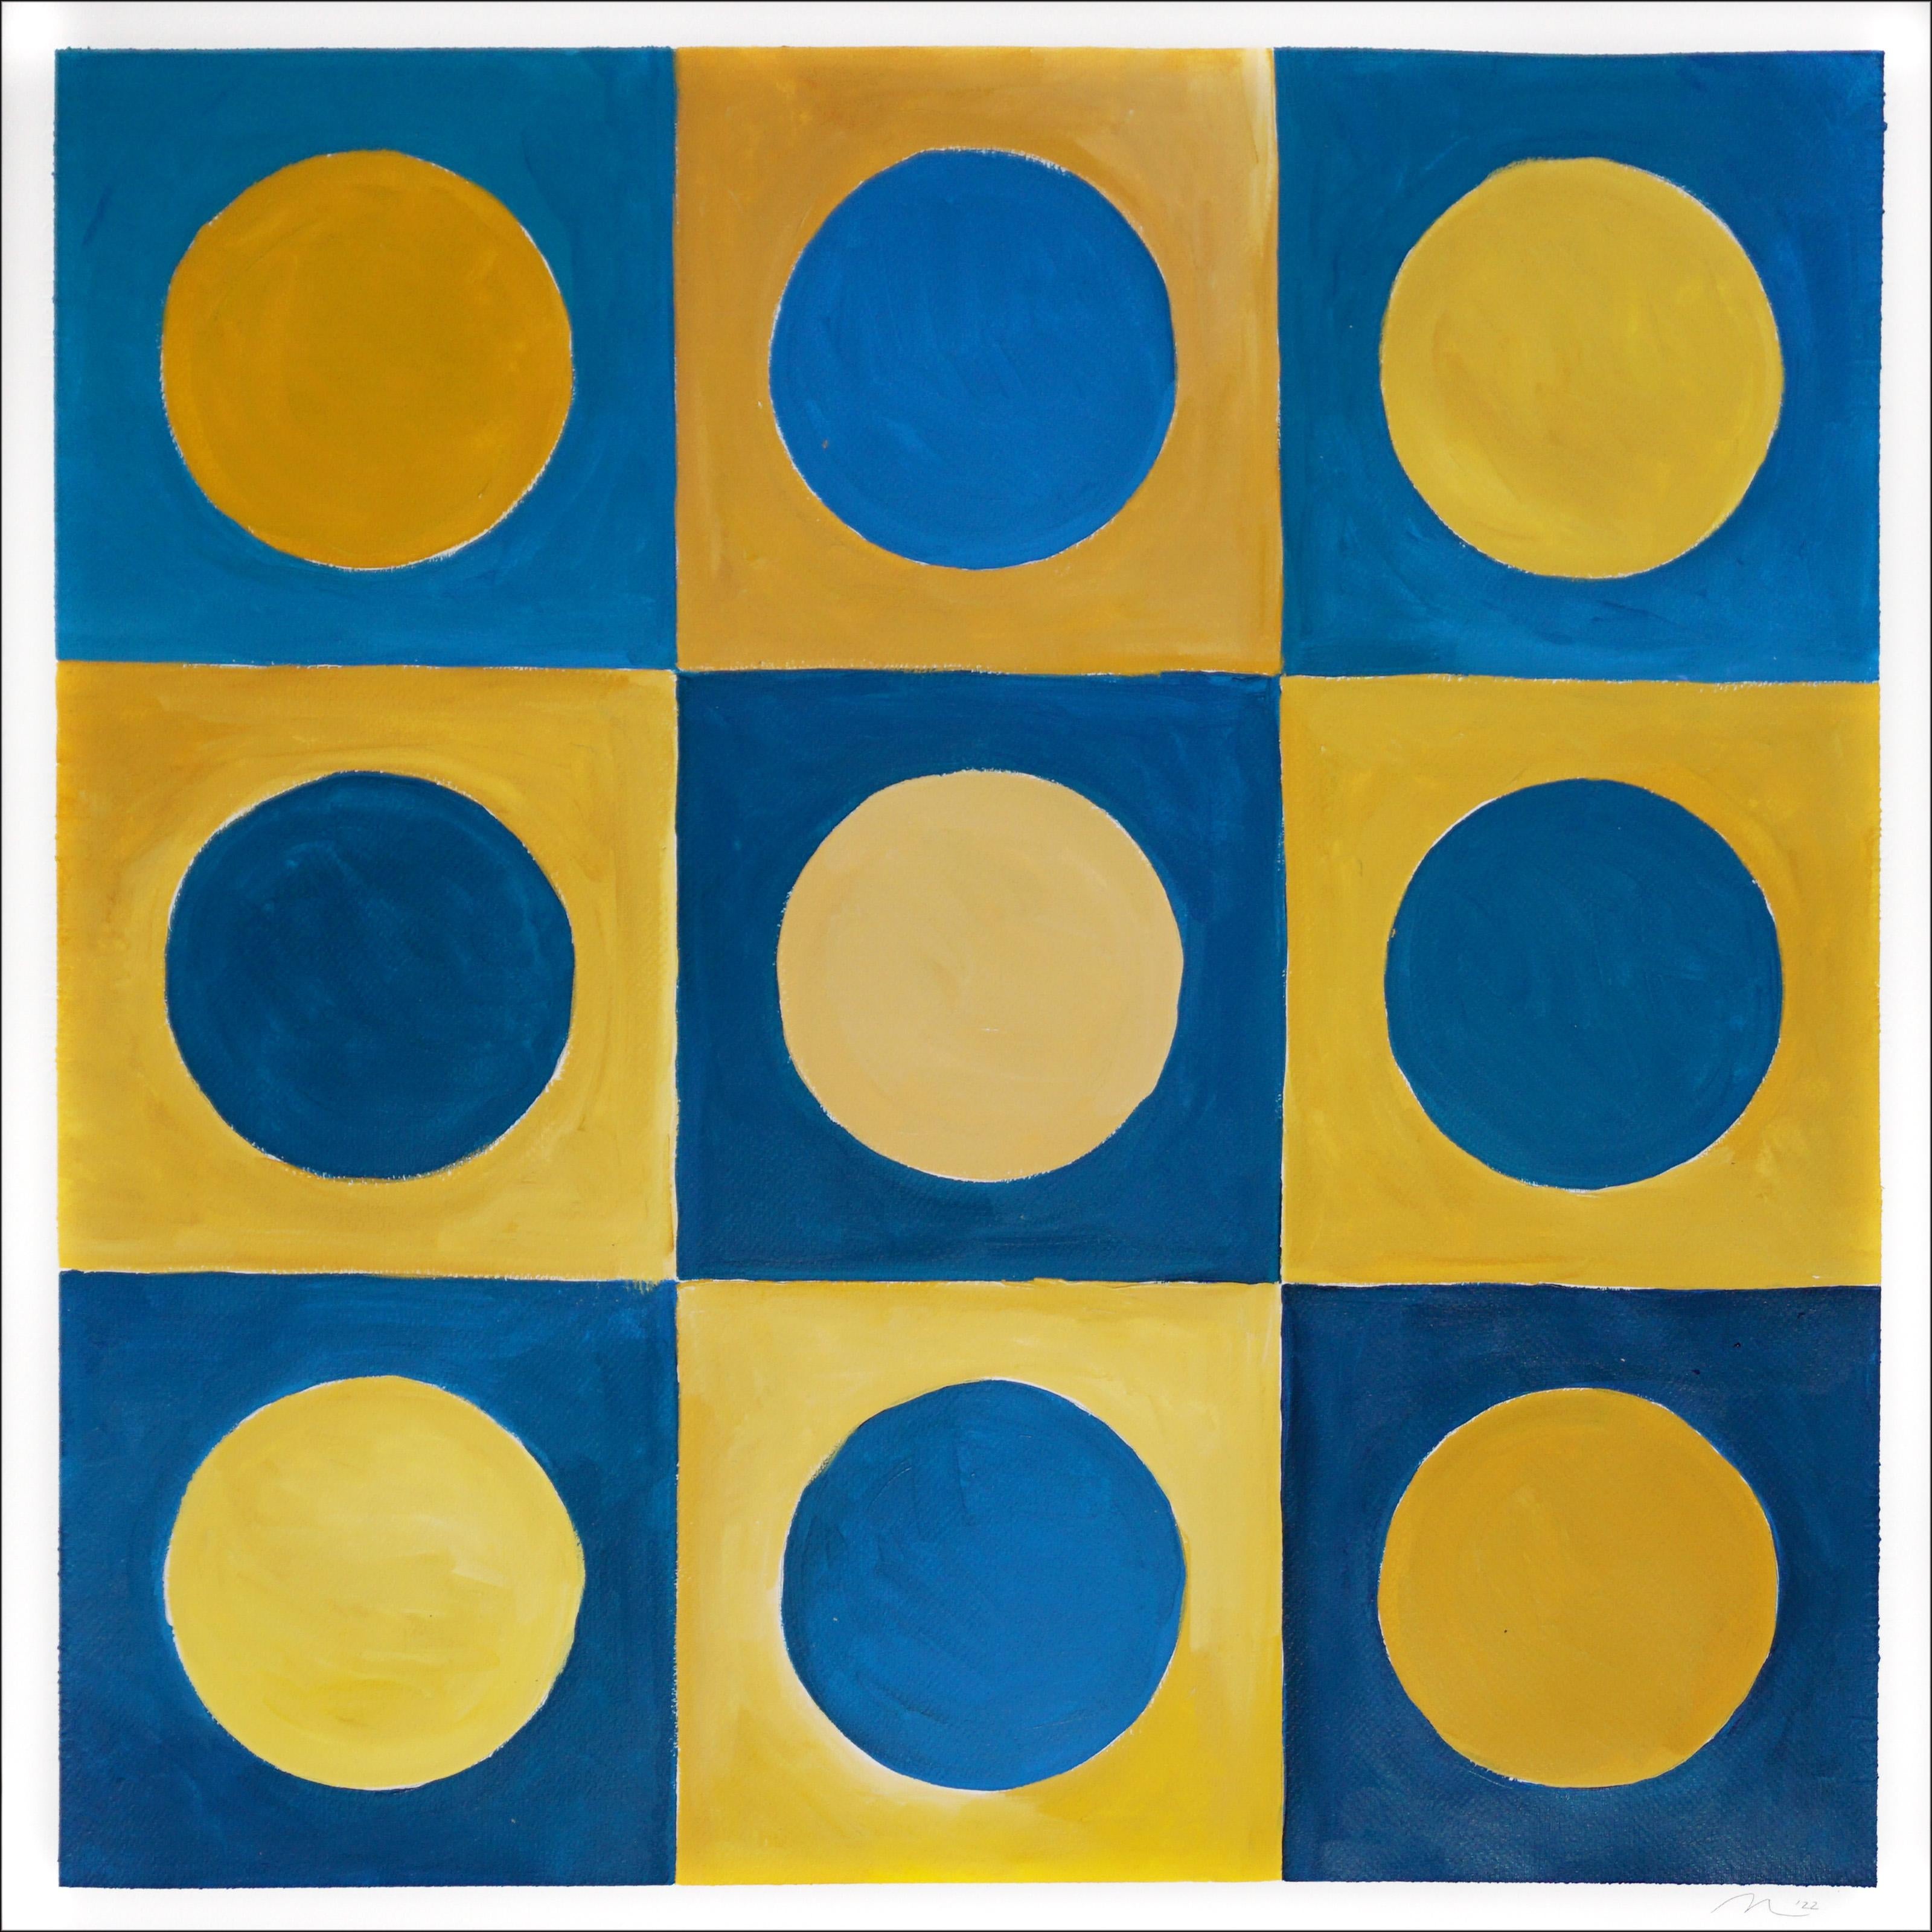 Natalia Roman Abstract Painting - Pale Blue Dots, Primary Geometry Grid, Yellow and Blue, Complementary Tones 